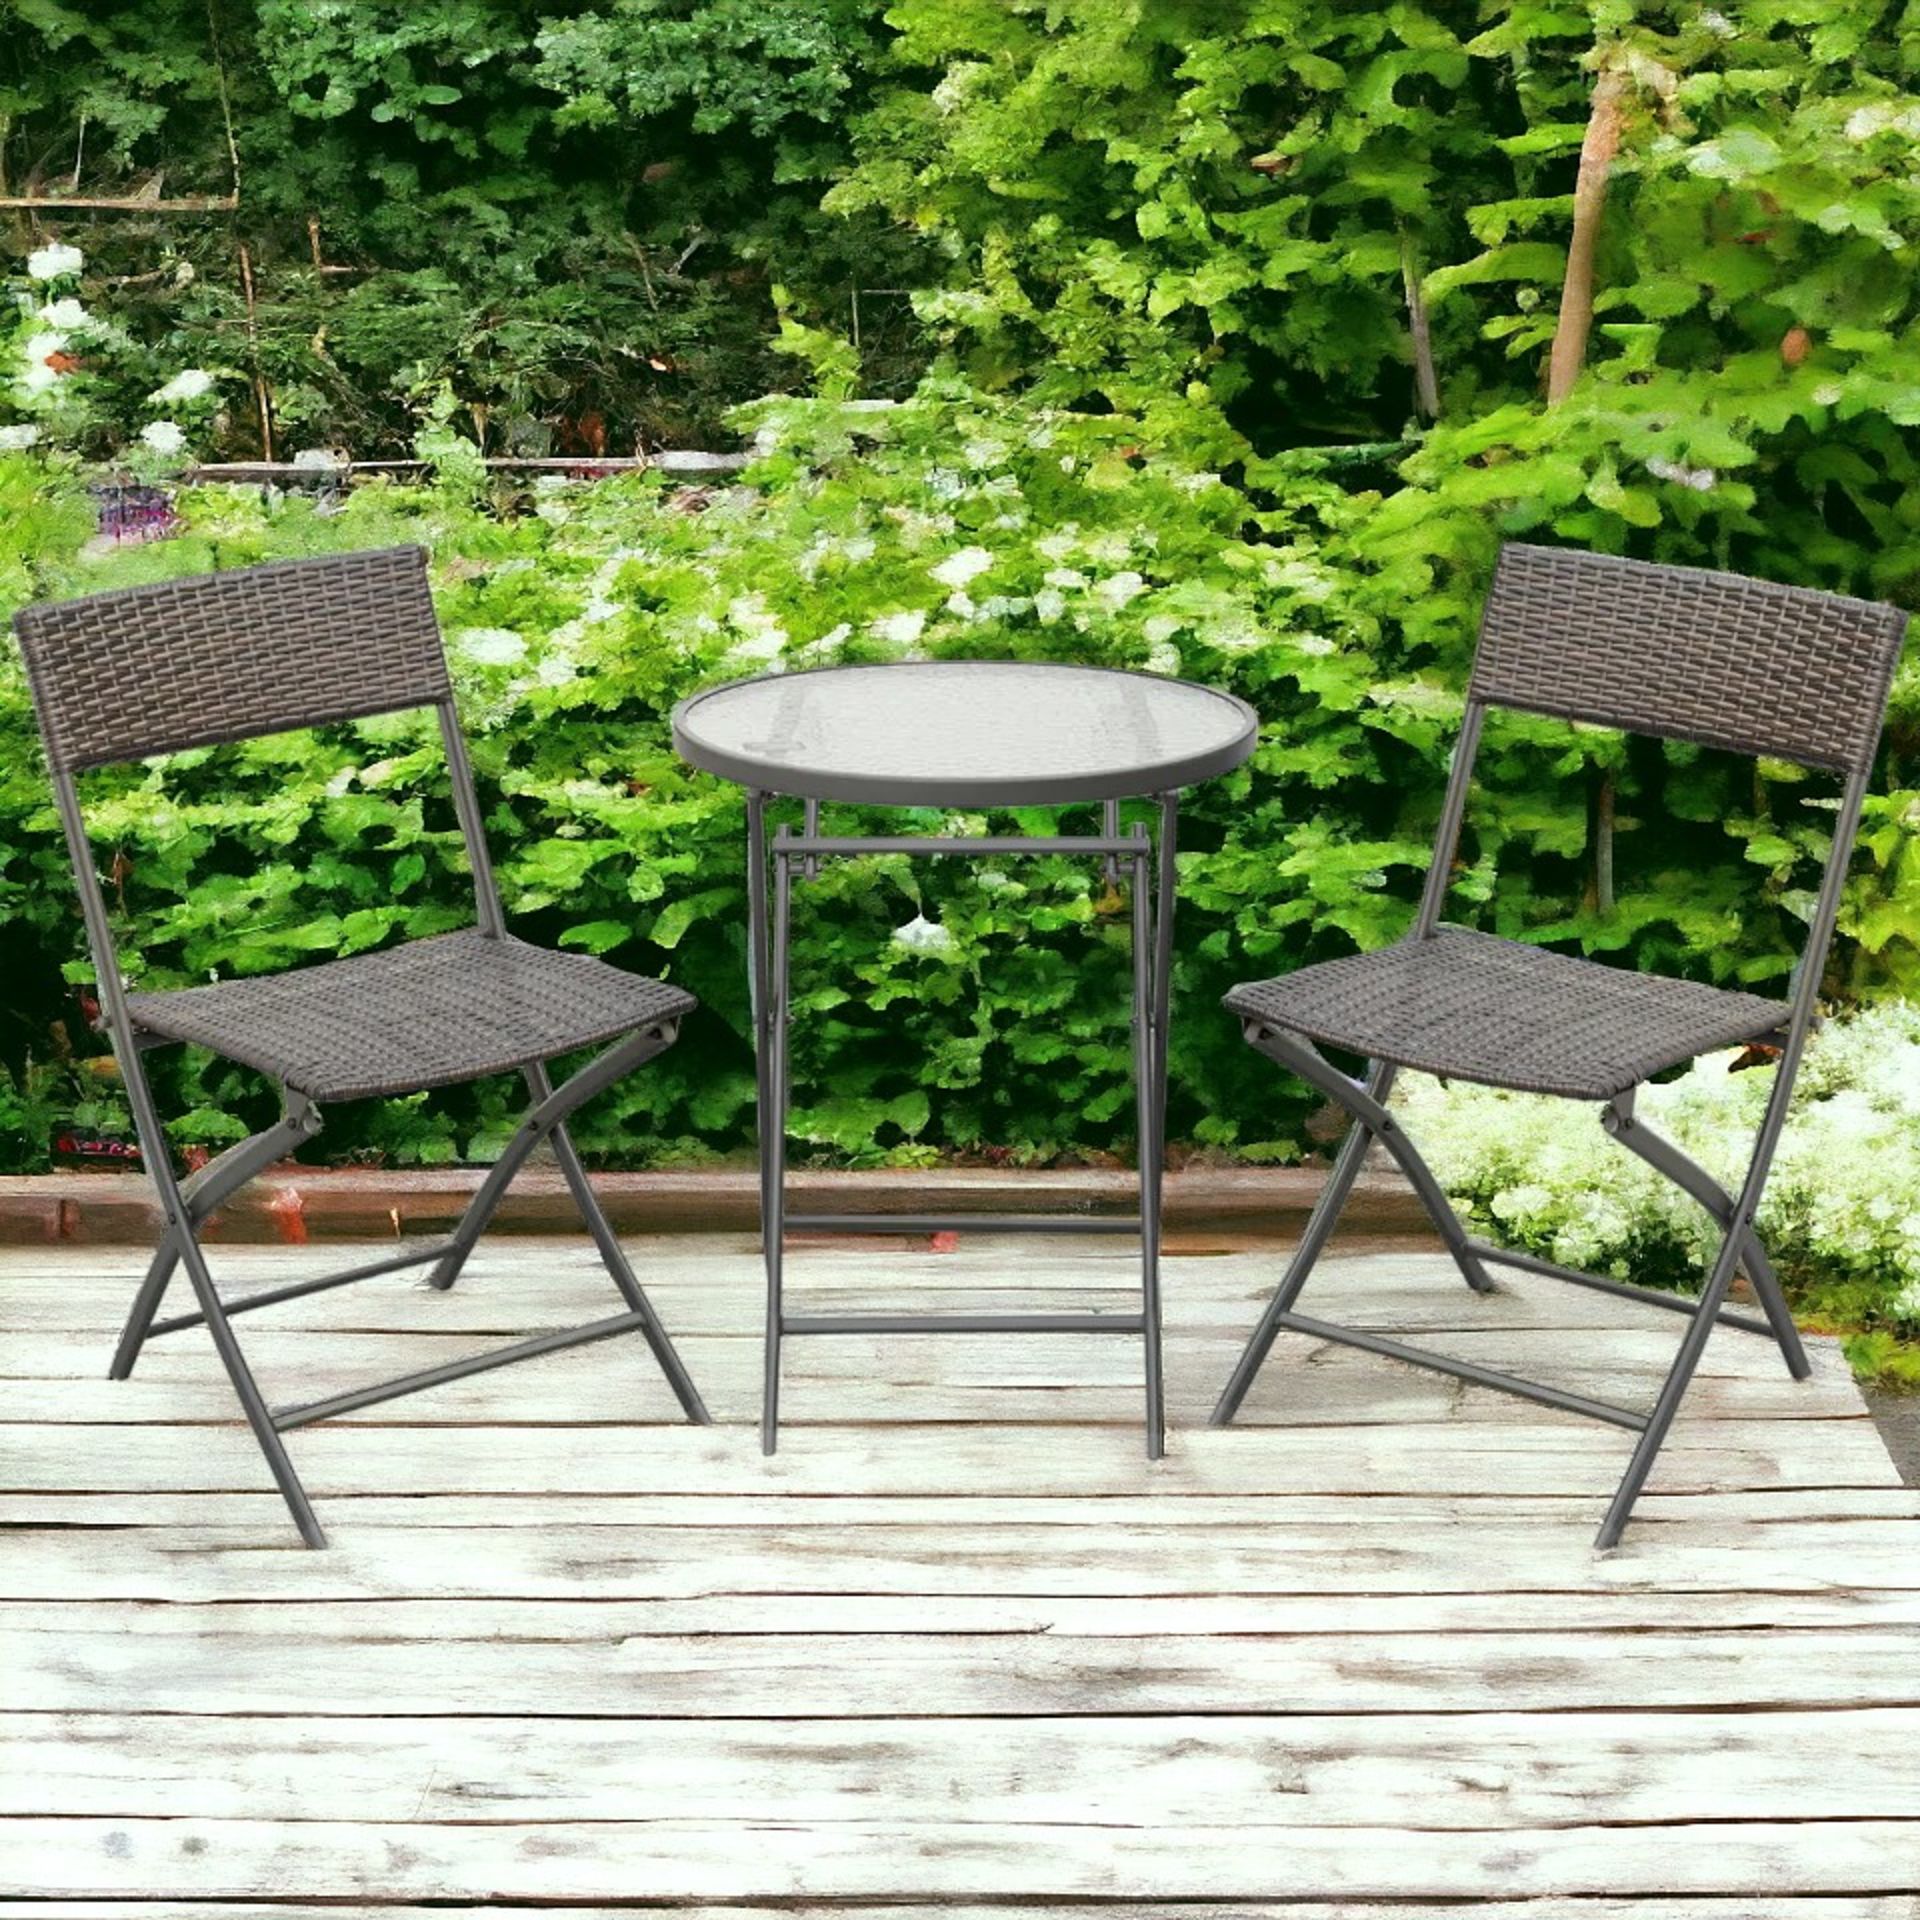 FREE DELIVERY- BRAND NEW 3PC RATTAN BISTRO SET FOLDING RATTAN CHAIR COFFEE TABLE GARDEN OUTDOOR - Image 2 of 2